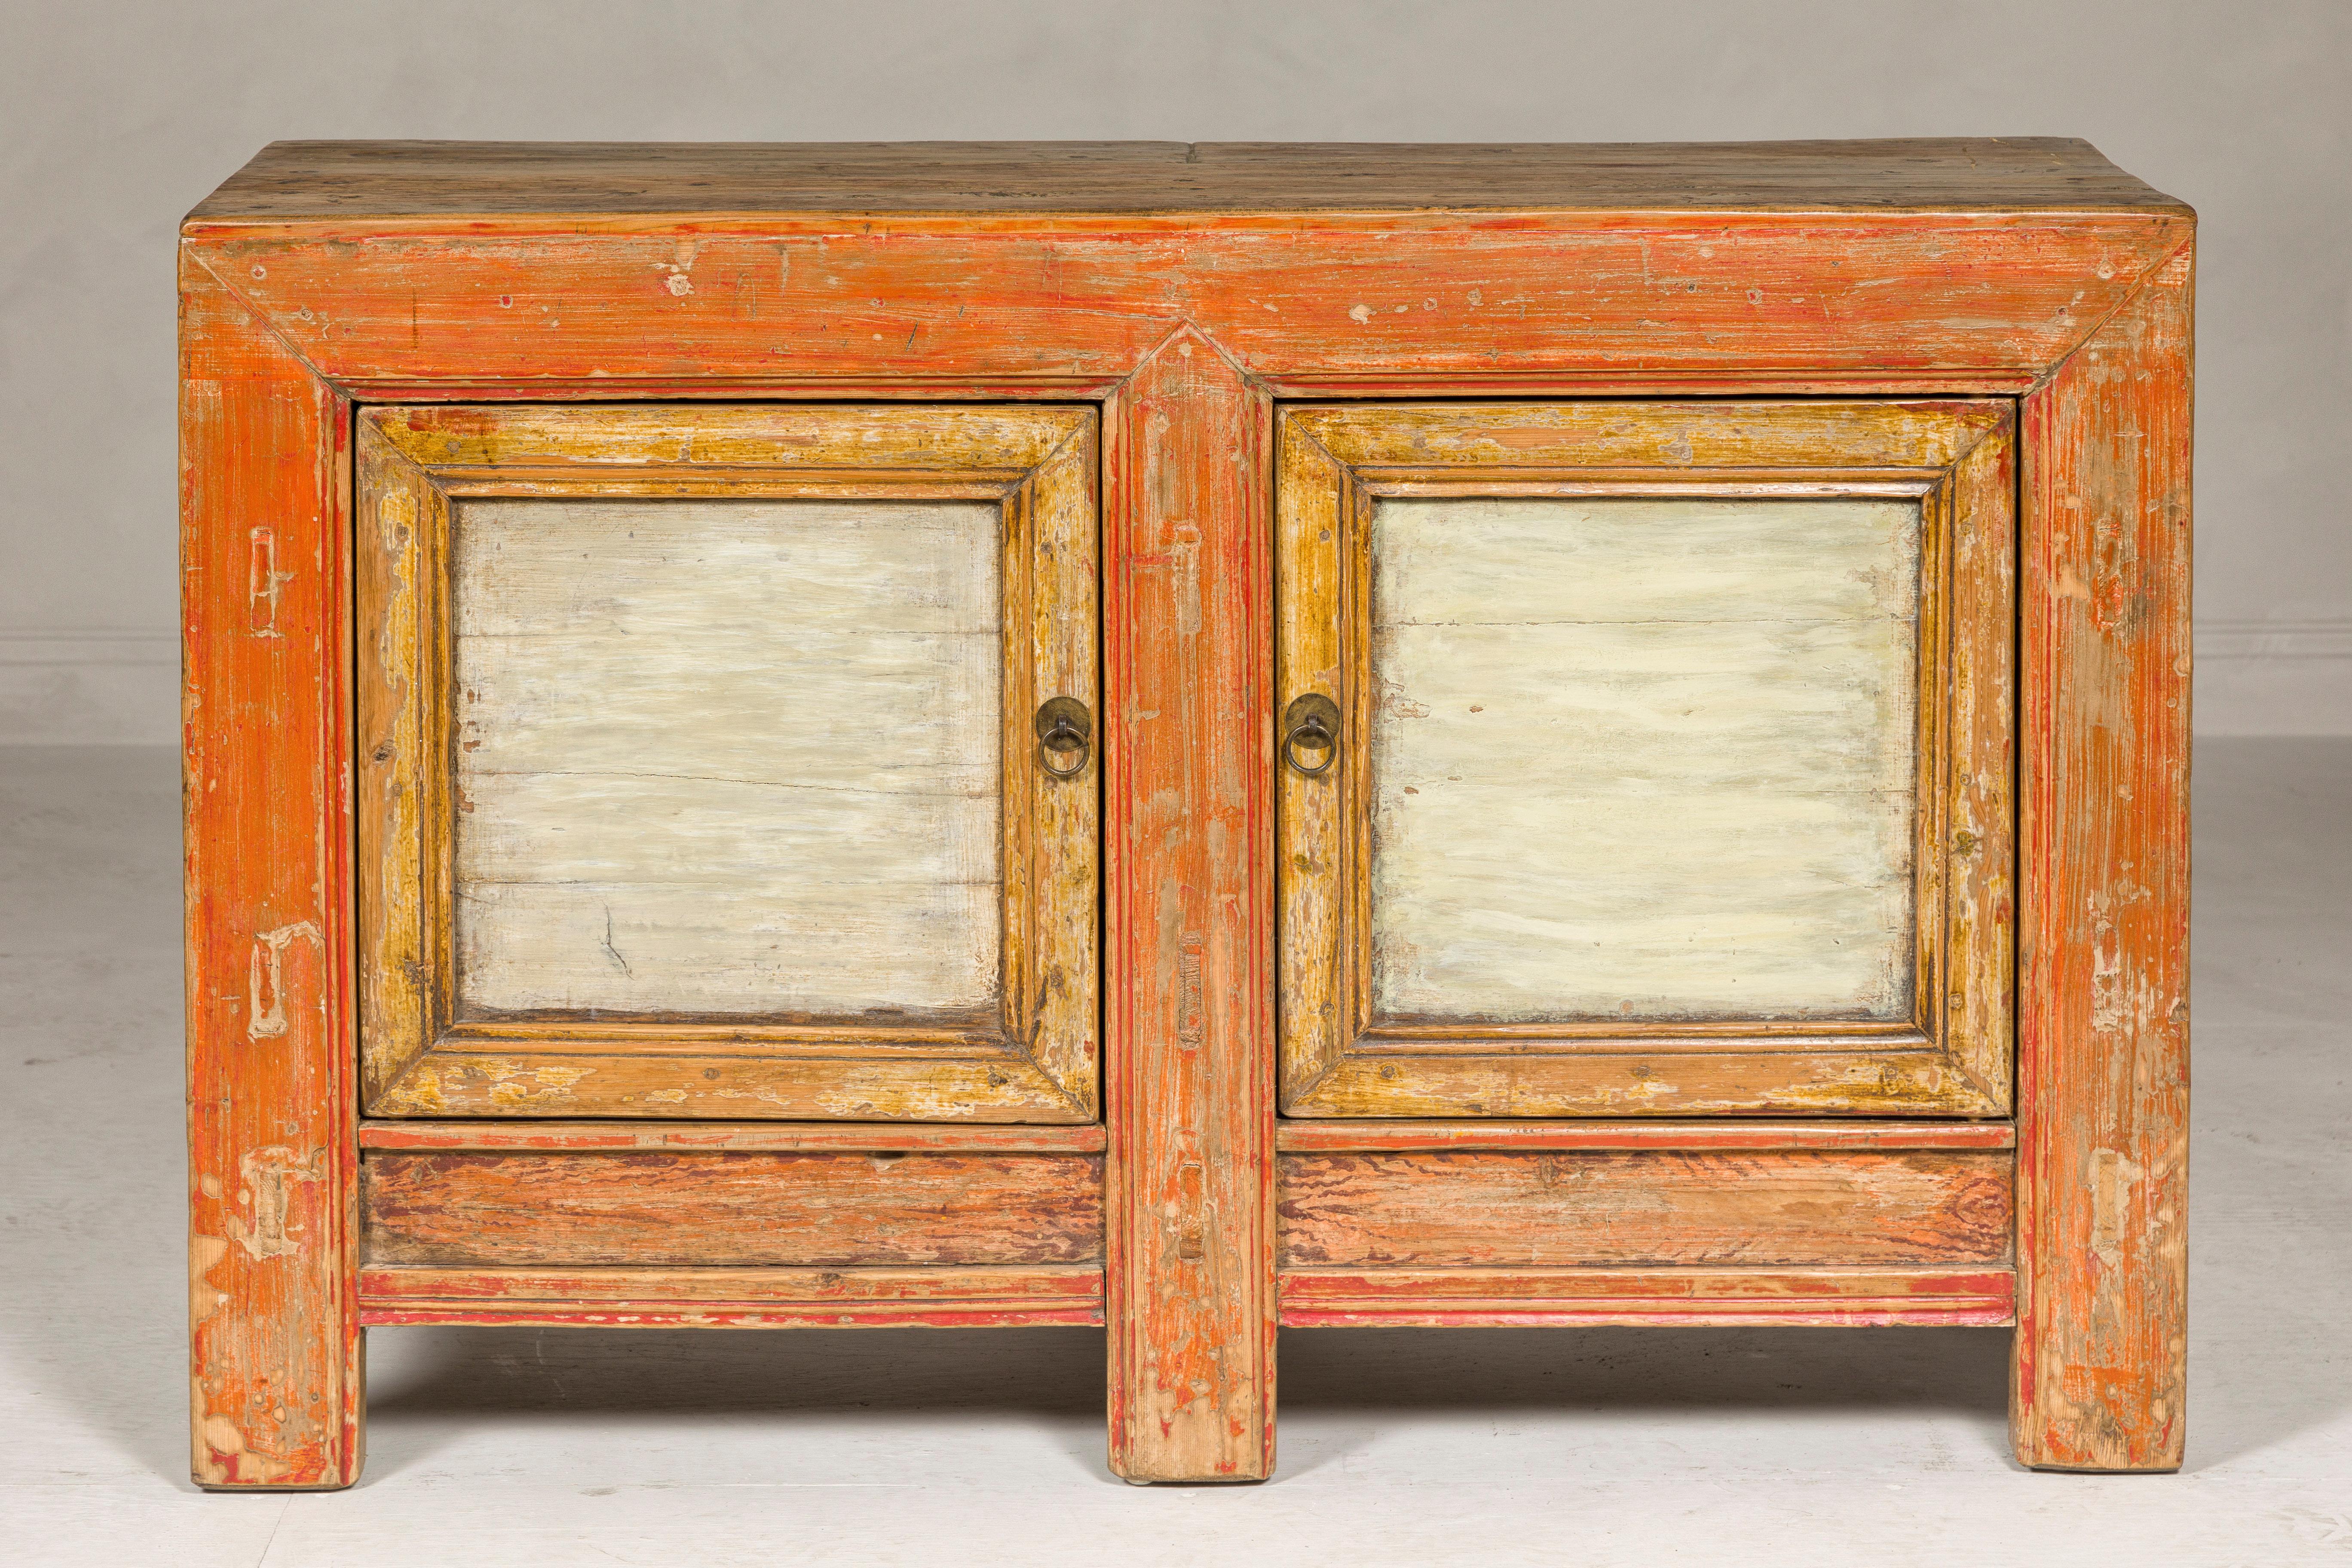 Country Style Painted Two-Door Buffet with Distressed Orange and Off-White Color For Sale 1